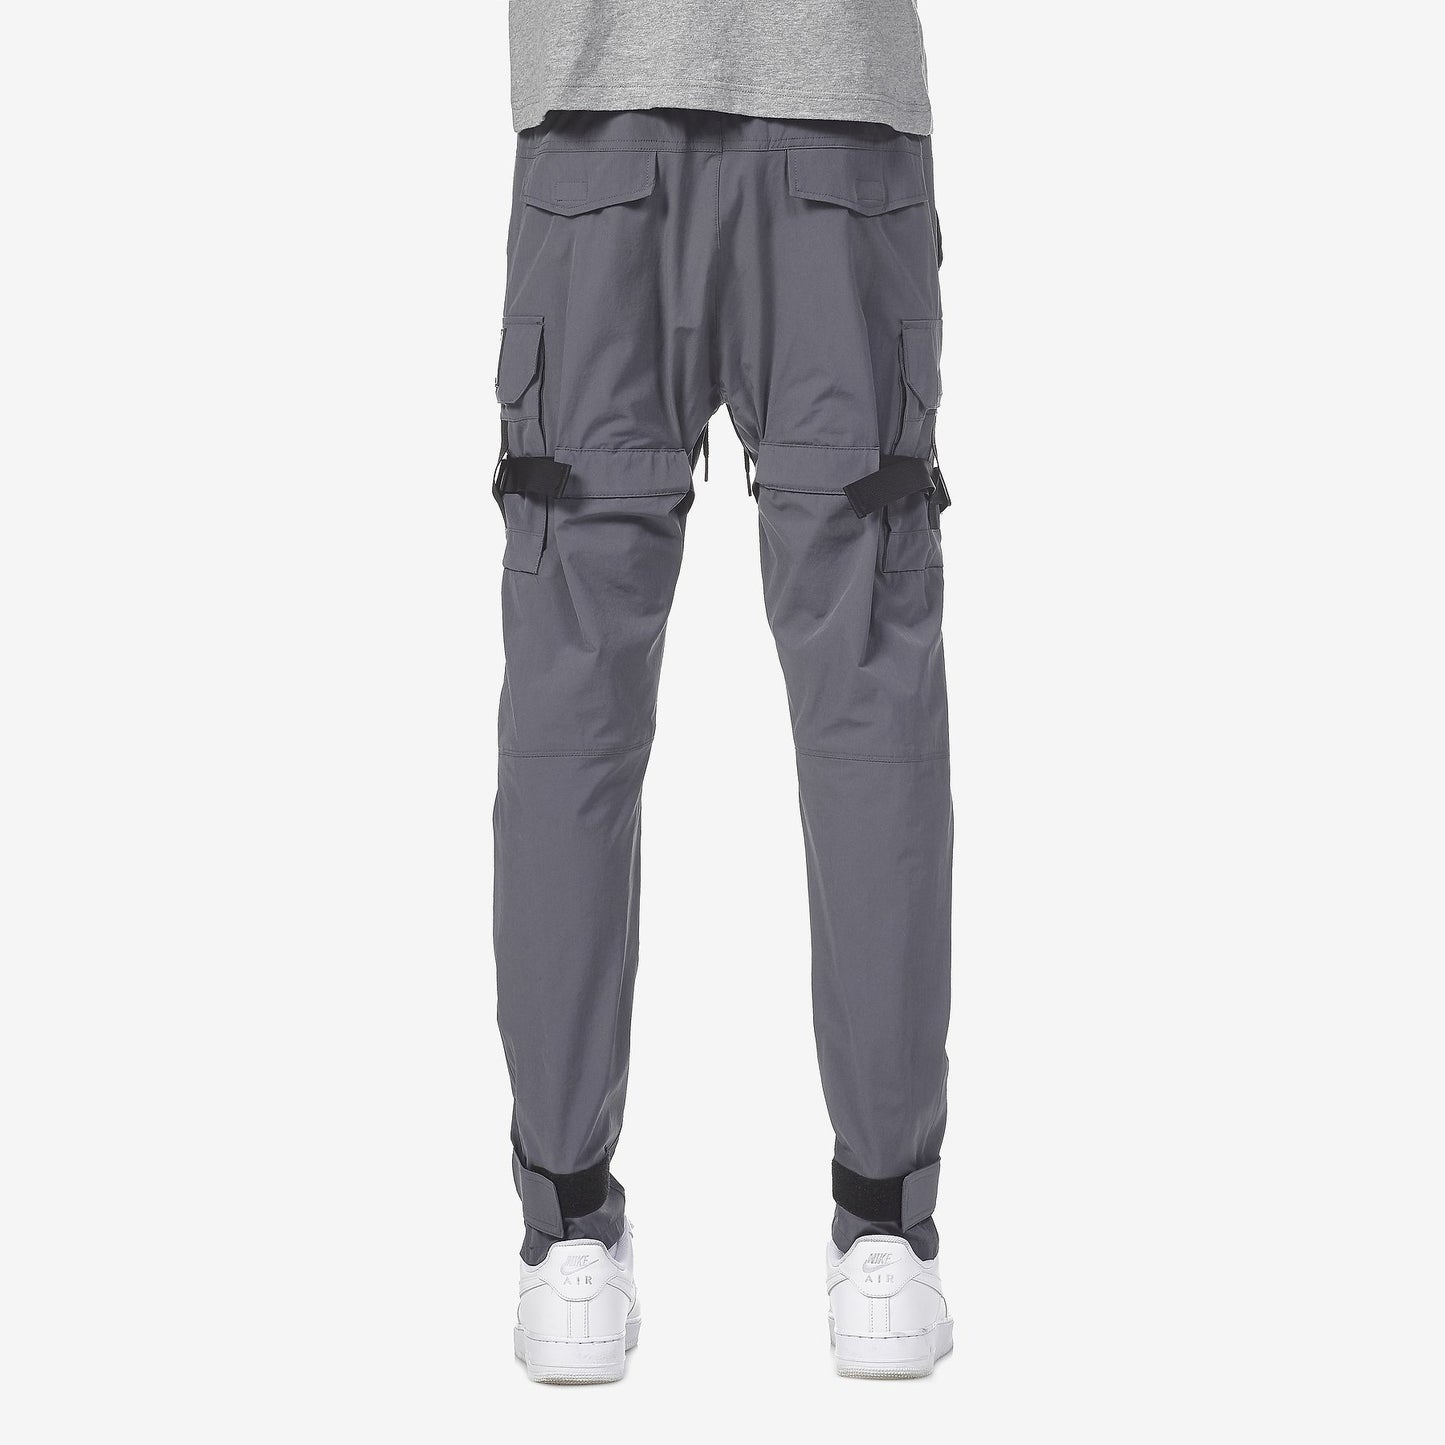 LIFE CODE GREY PANTS WITH BUCKLE & STRAPS - Copper Rivet